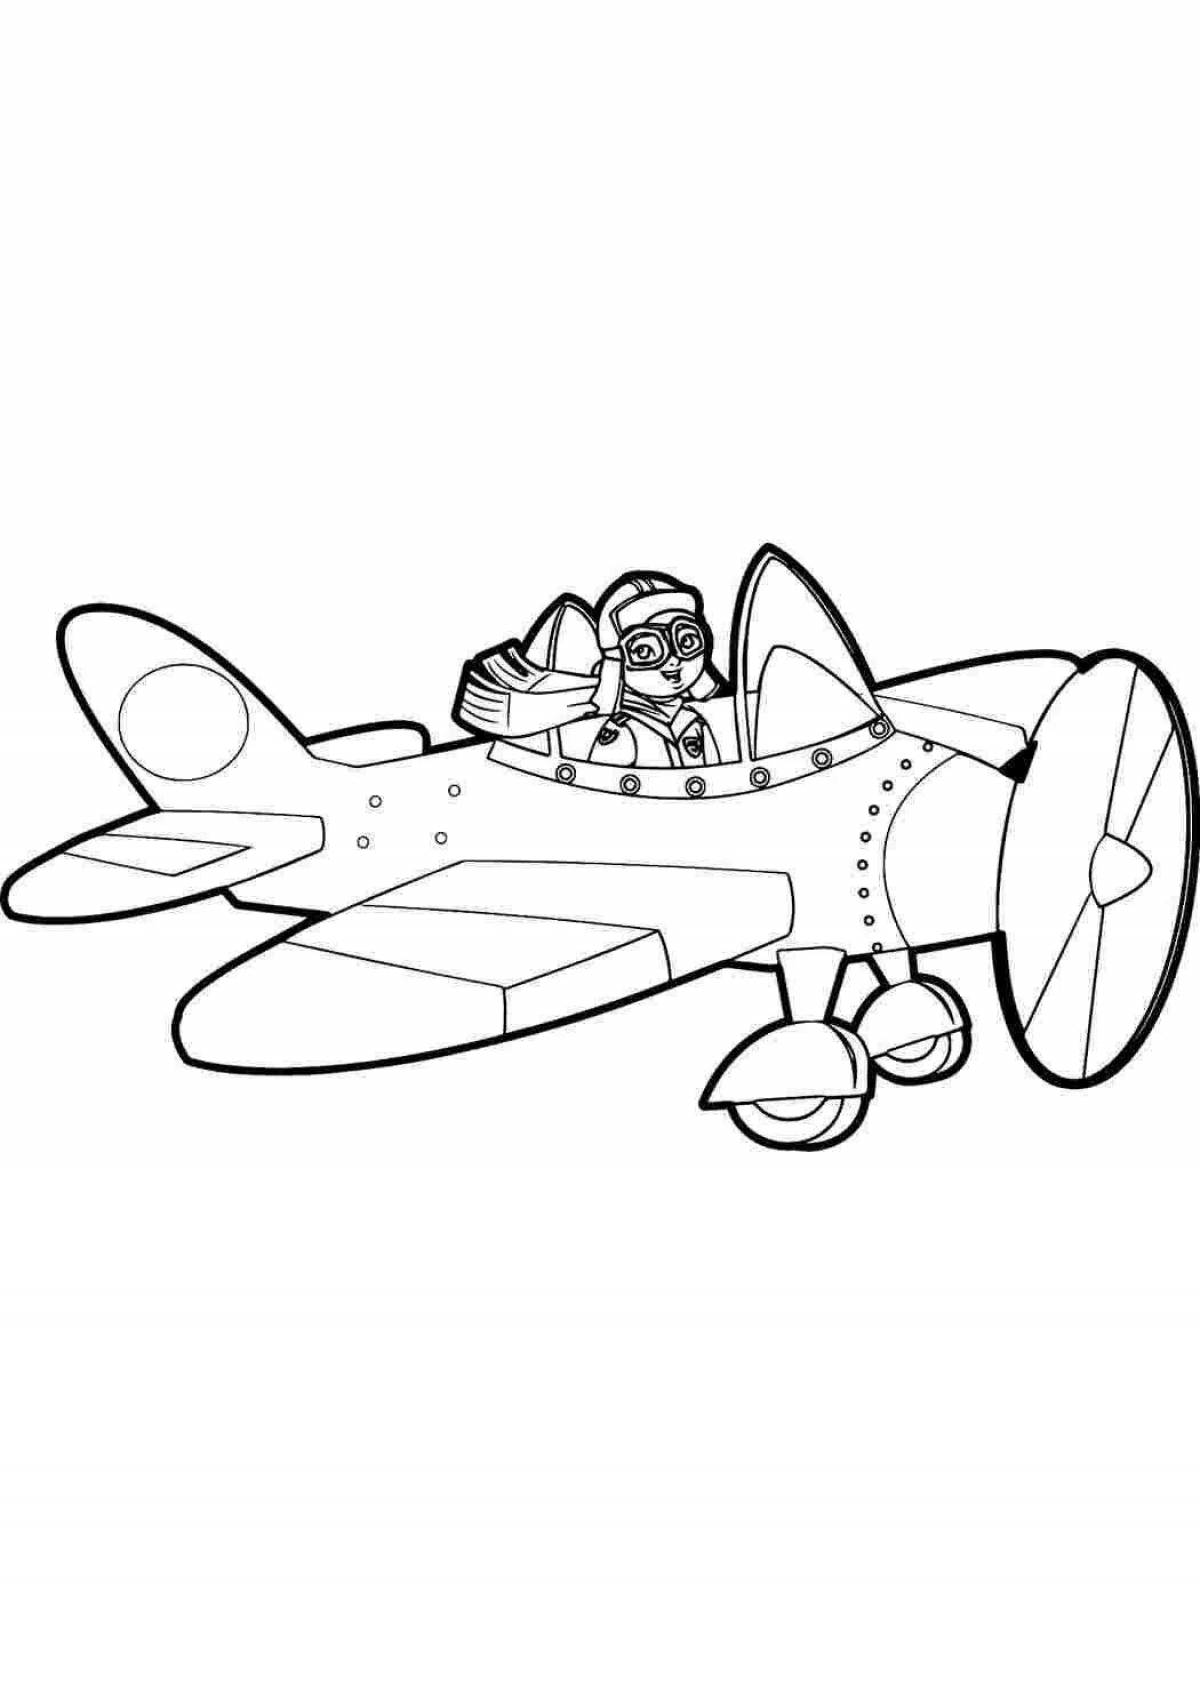 Amazing Pilot Coloring Page for Kids